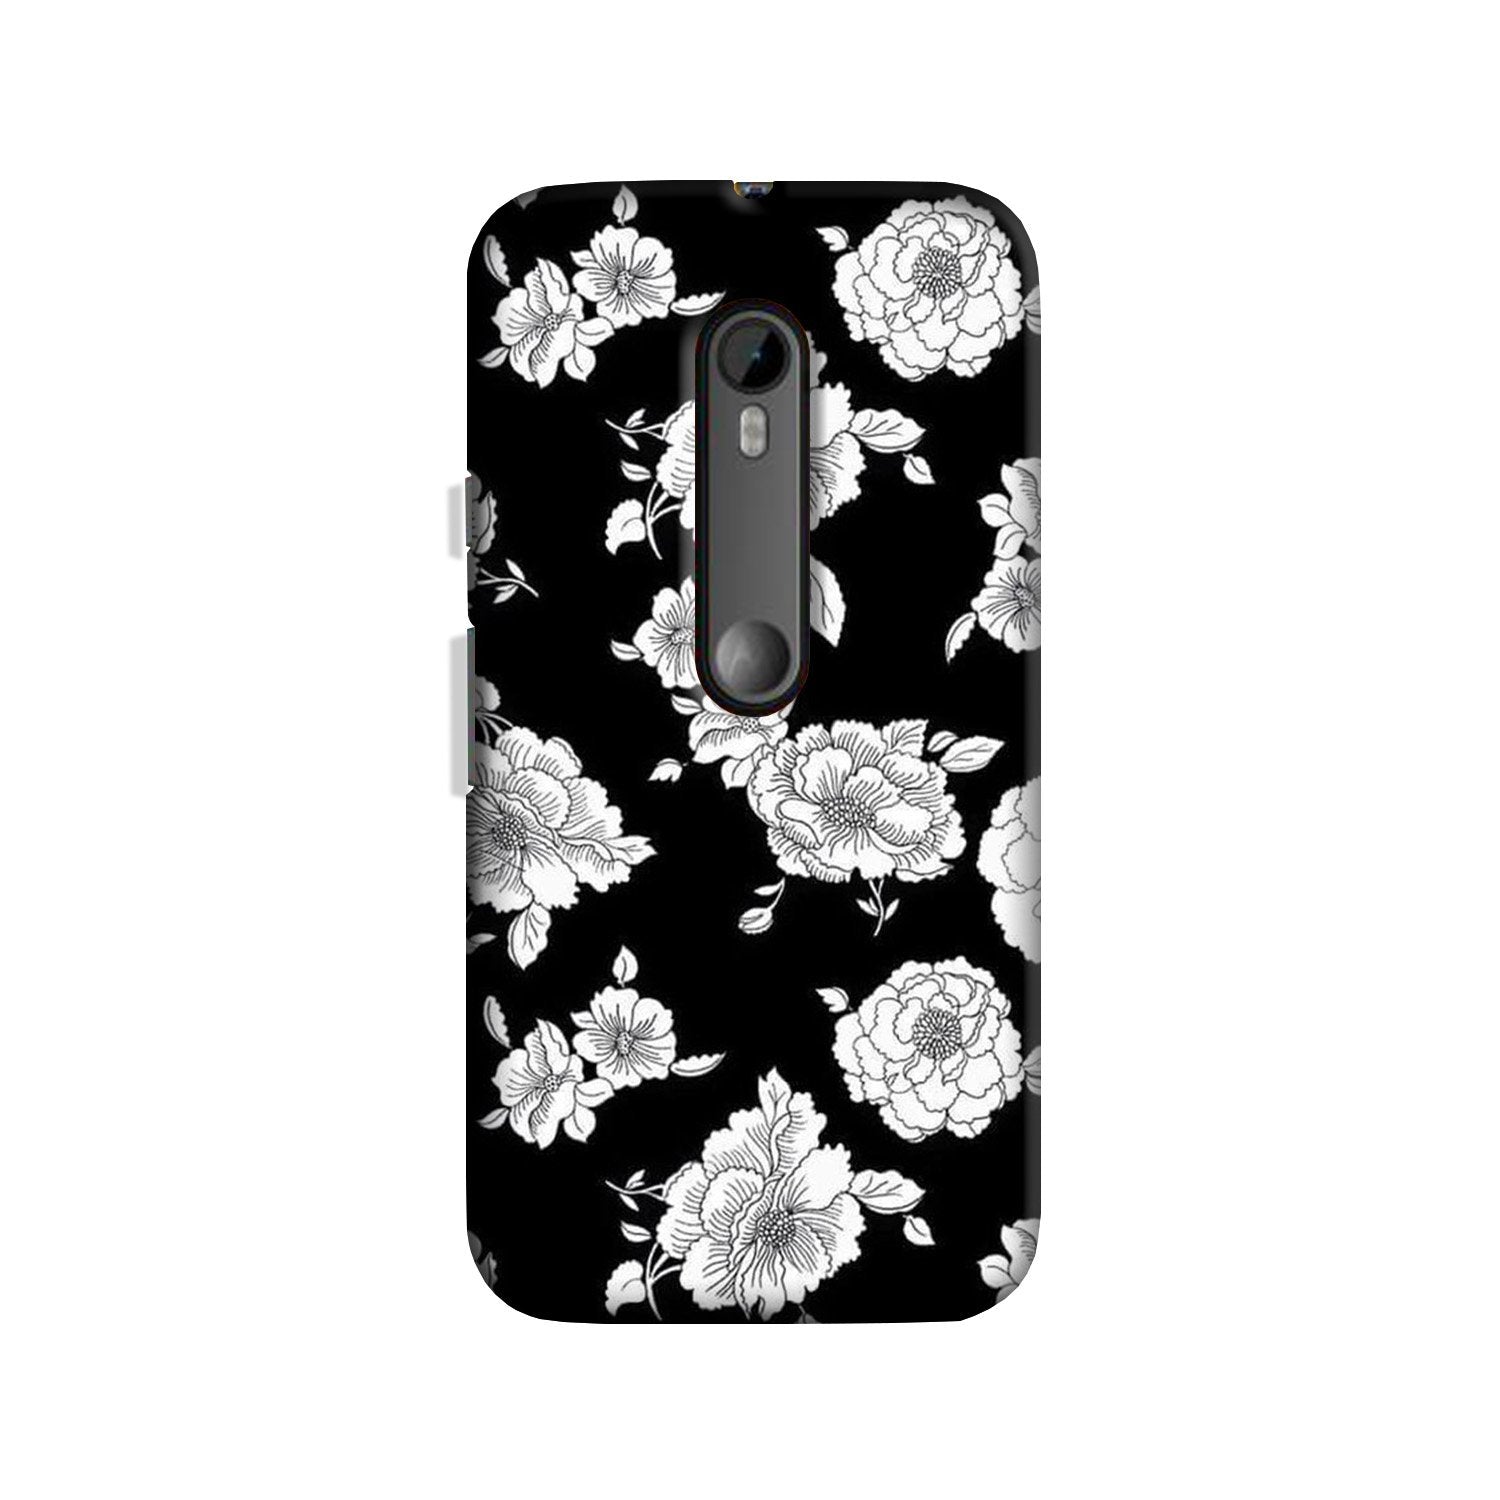 White flowers Black Background Case for Moto X Force